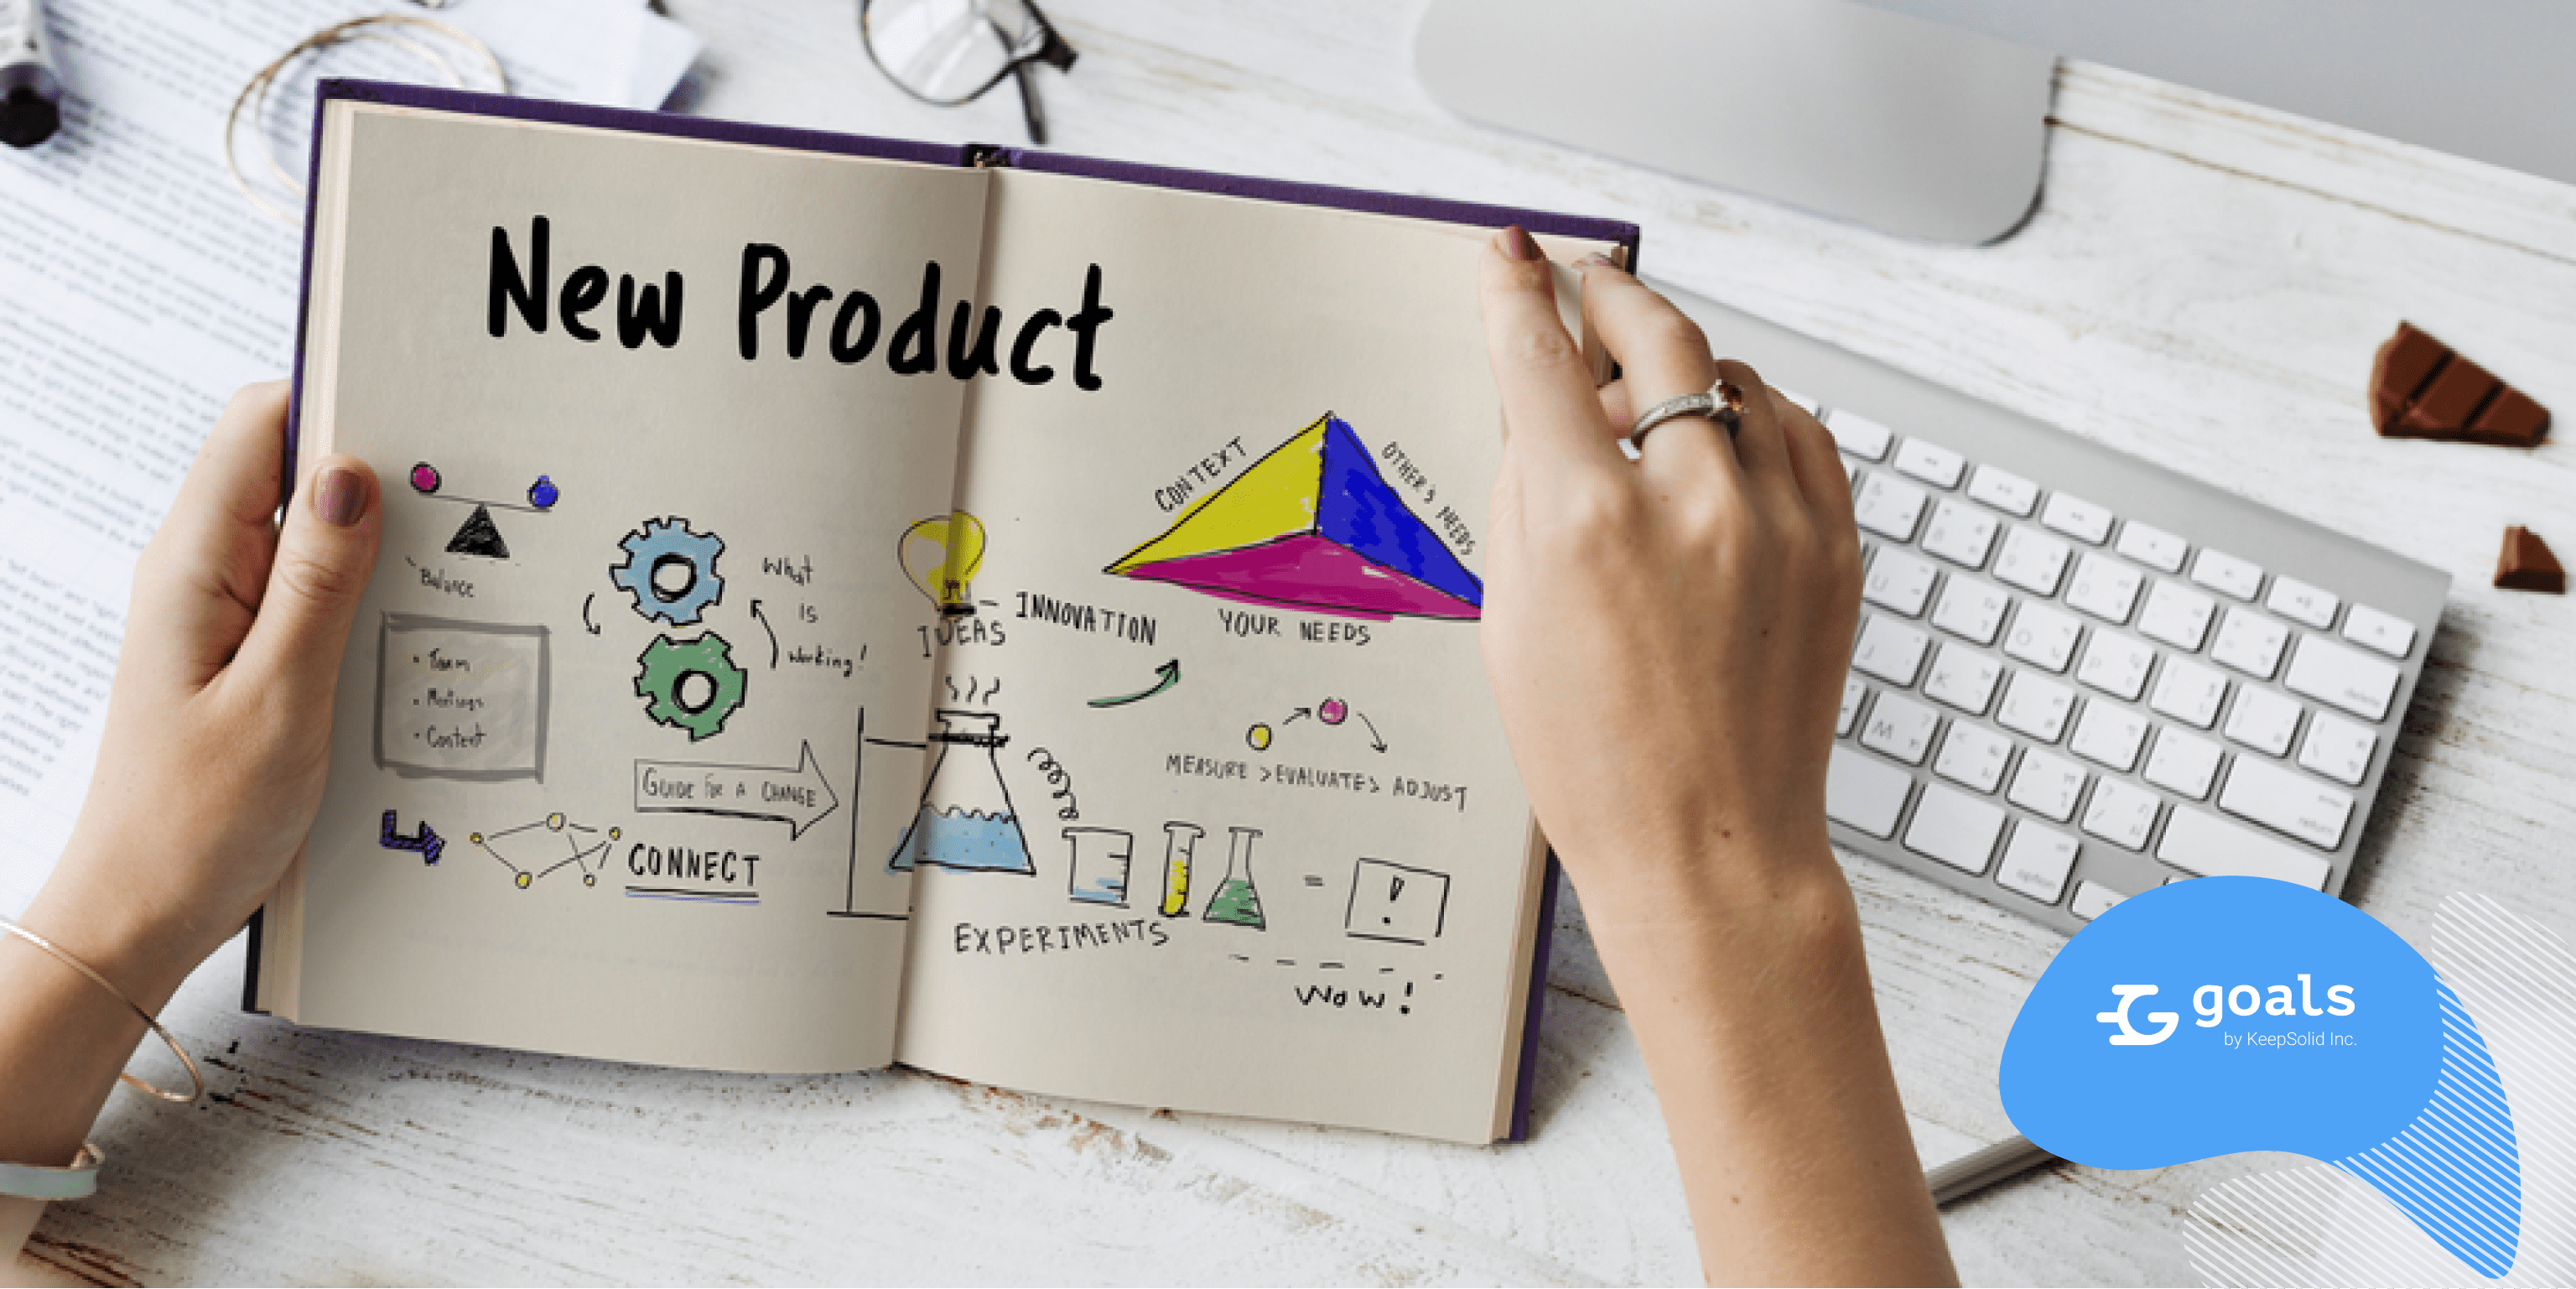 Product launch as the last step of product development process